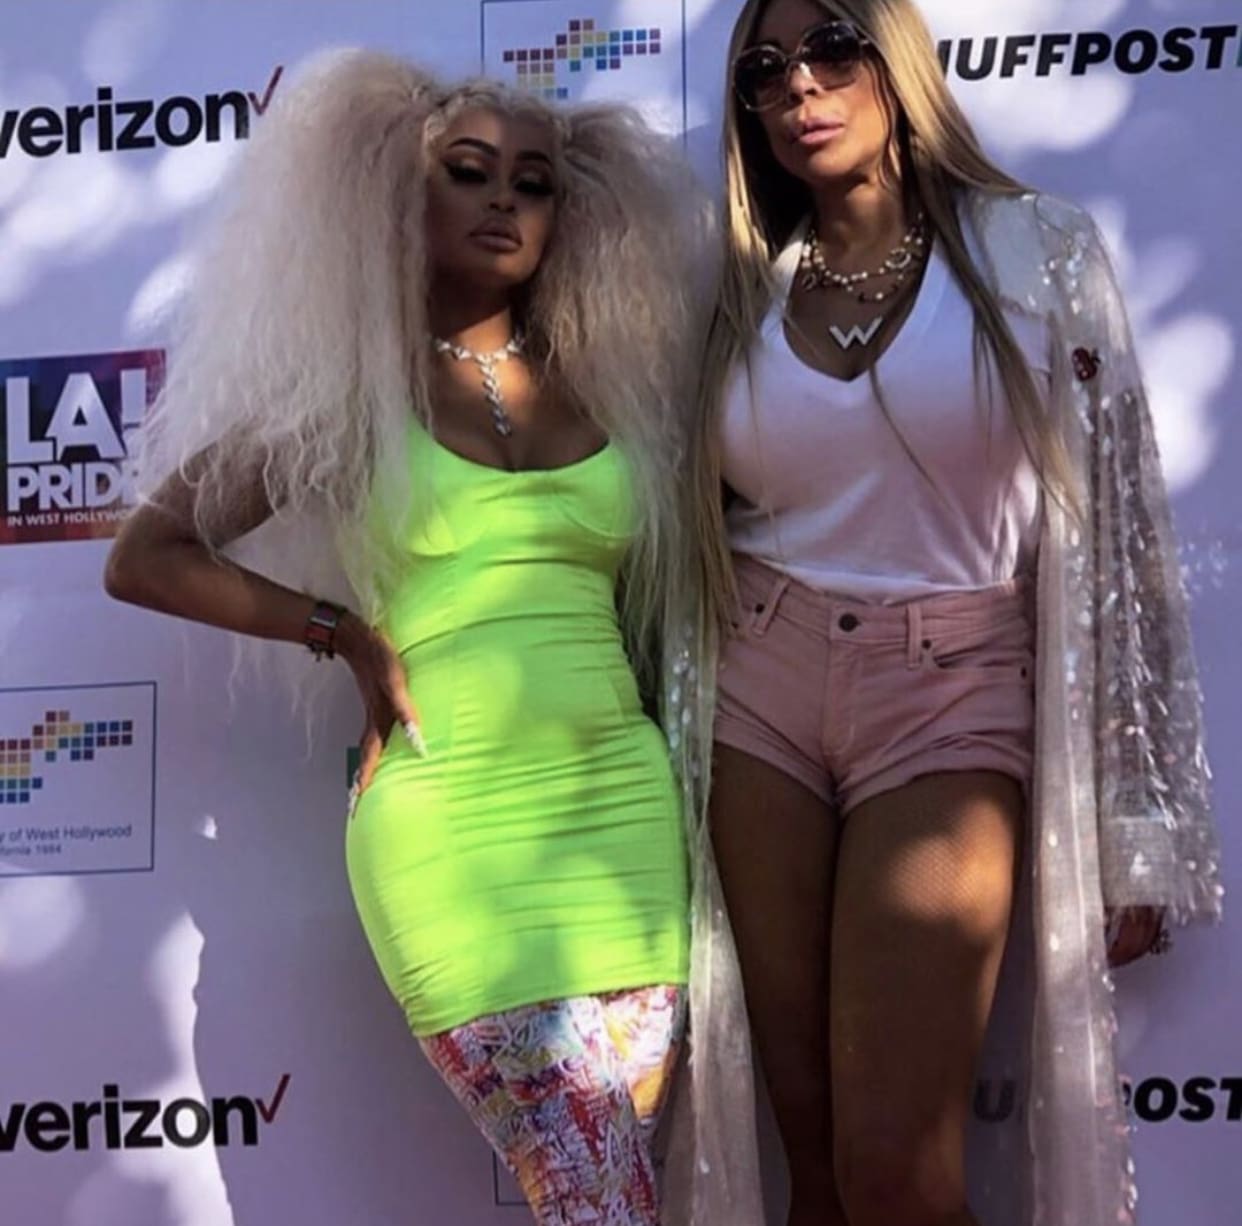 Blac Chyna Parties With Wendy Williams And Fans Are Begging Her To Take The Photo Down - See The Reason